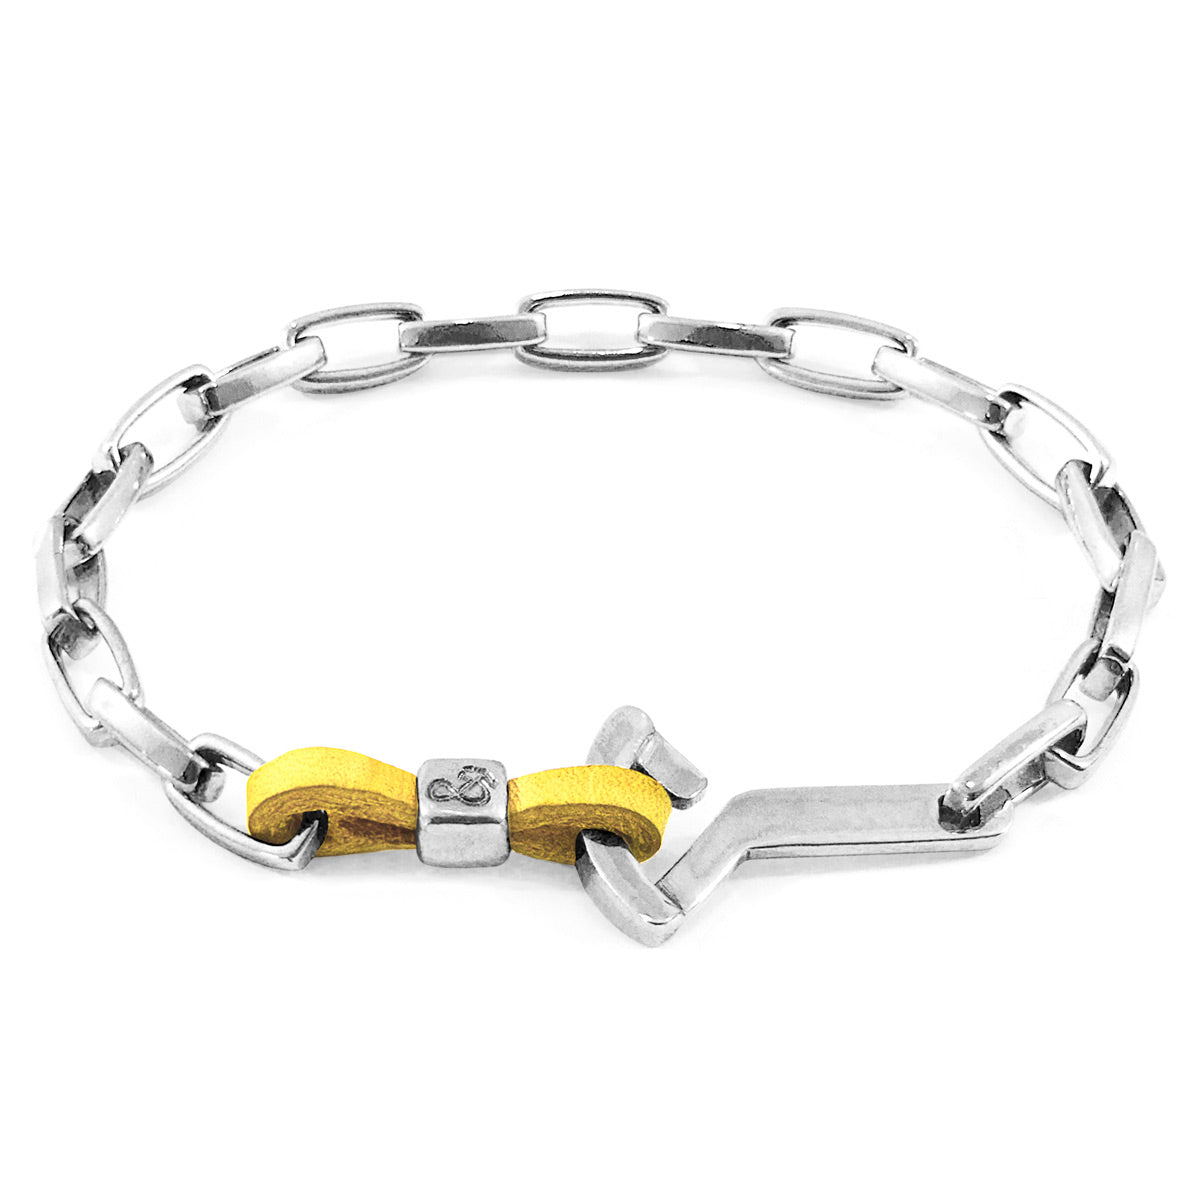 Mustard Yellow Frigate Anchor Silver and Flat Leather Bracelet